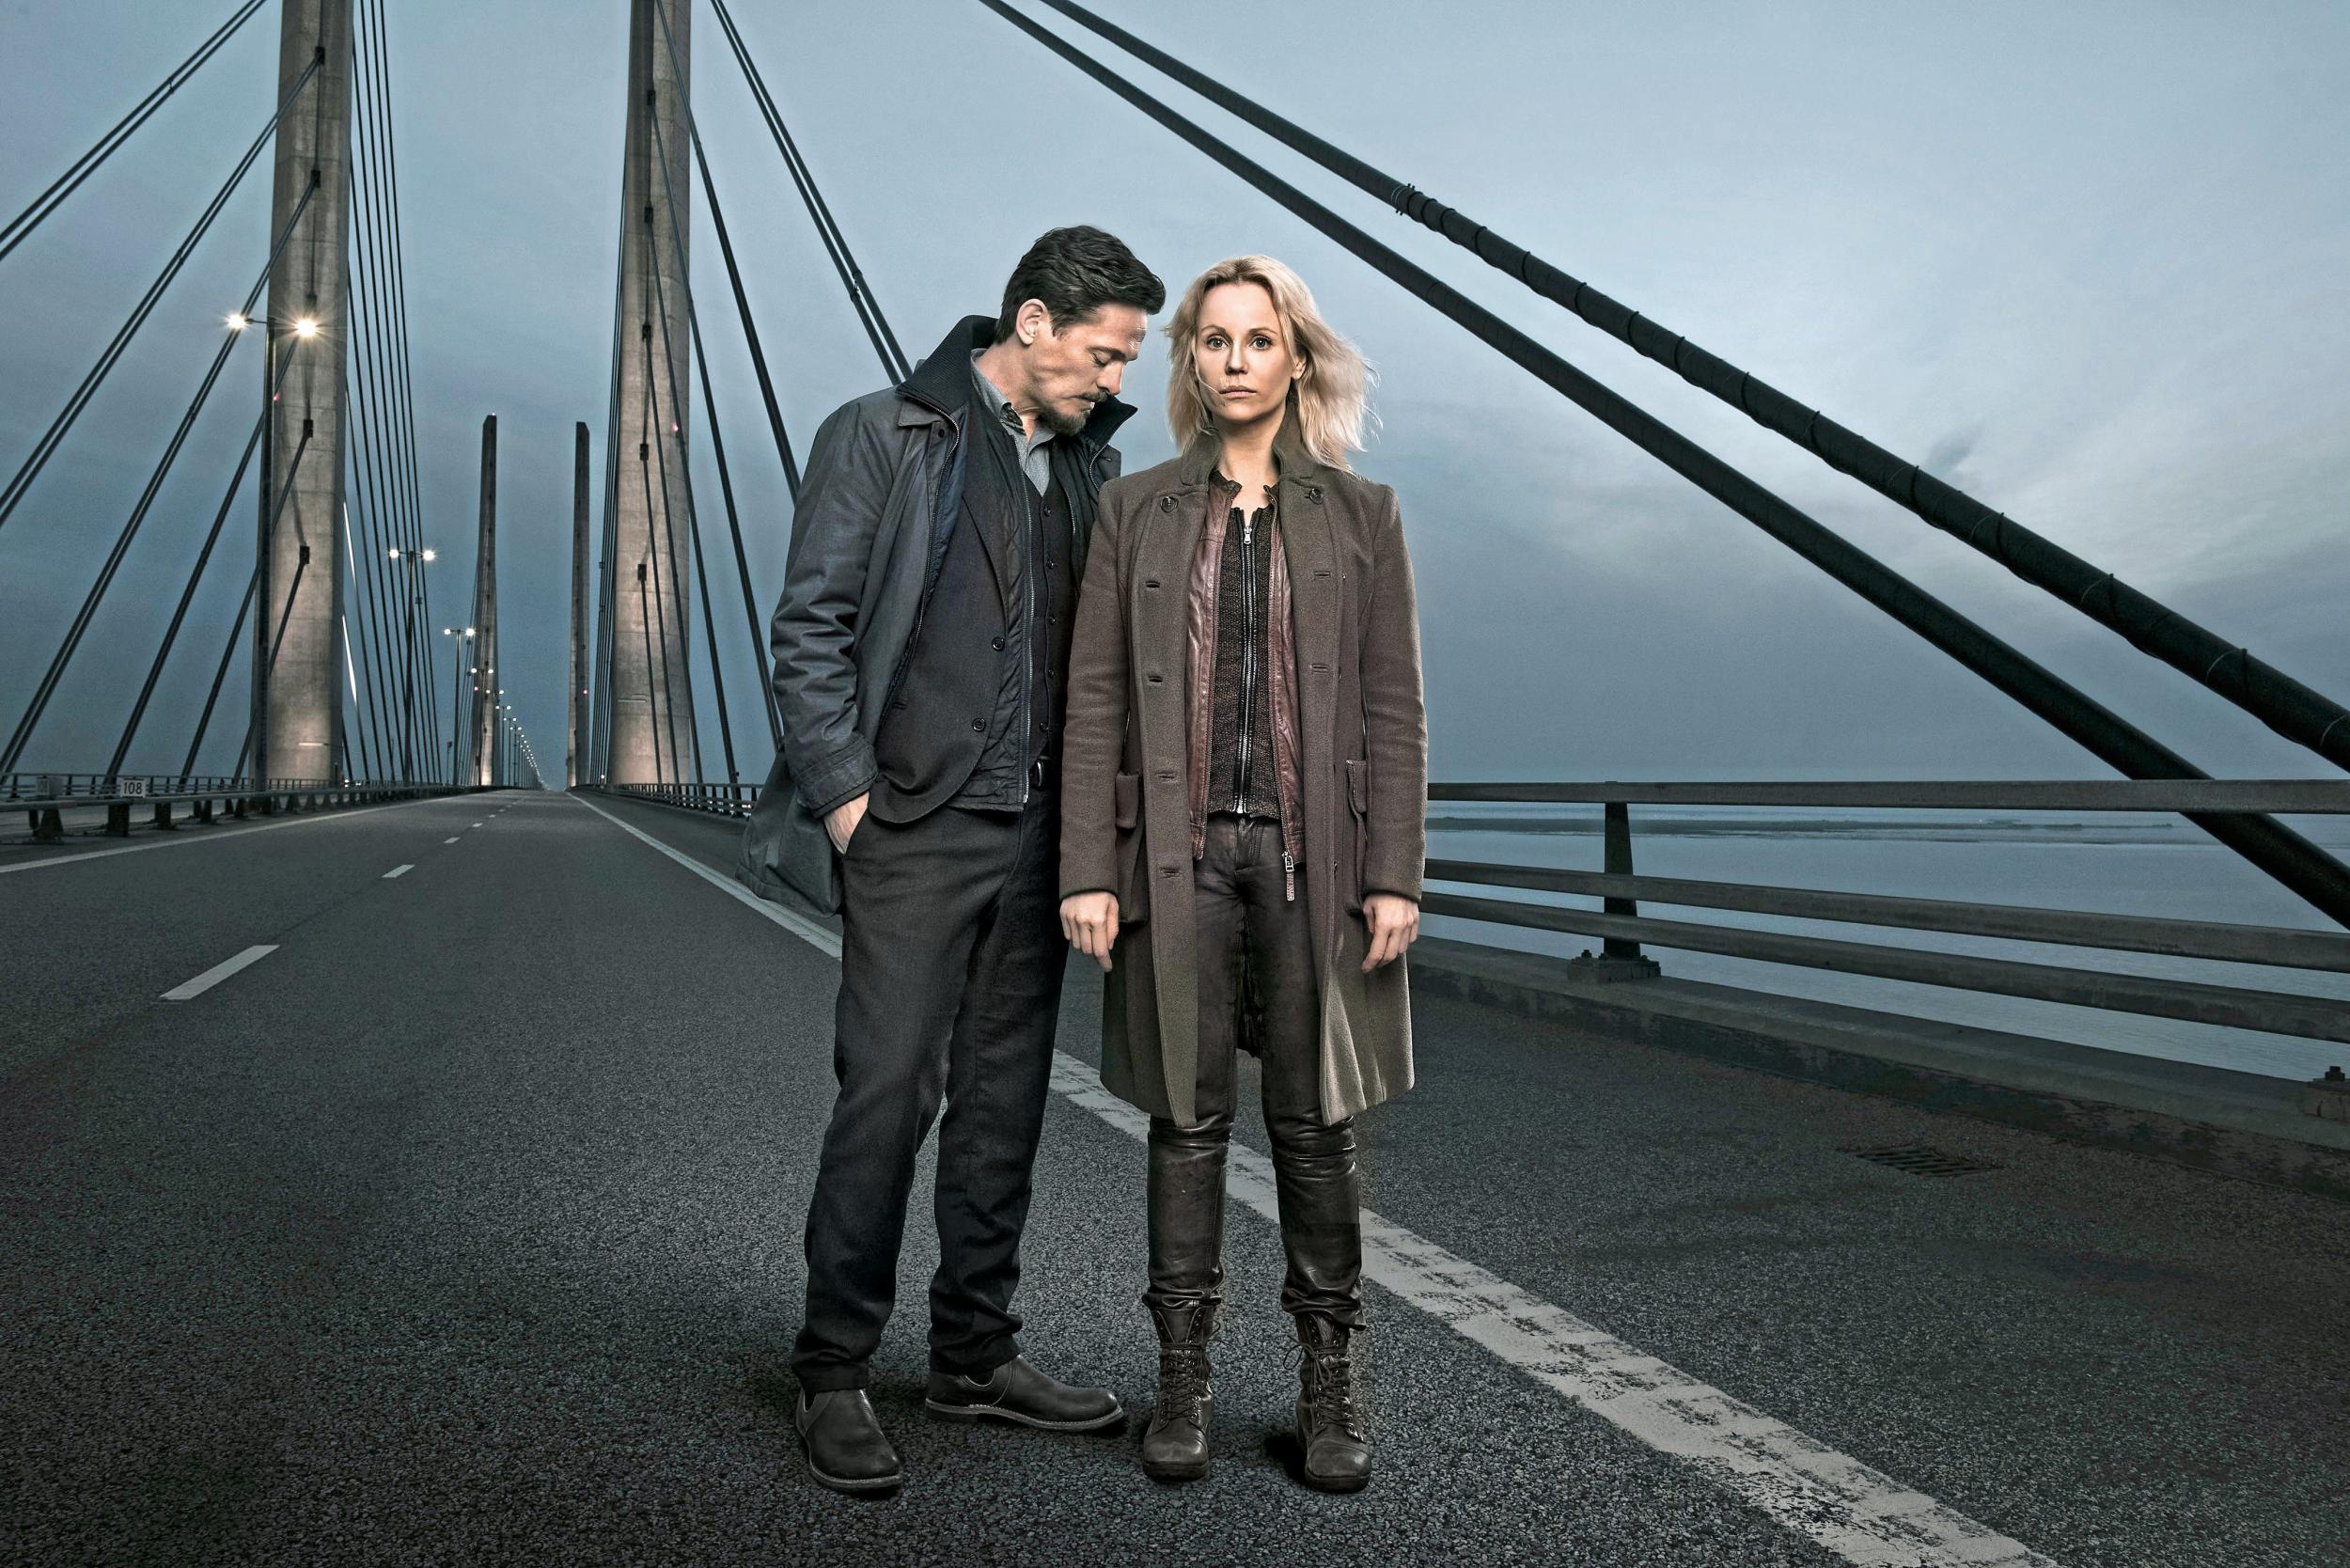 Saga Norén and her co-detective Henrik Saboe are played by Sofia Helin and Thure Lindhardt